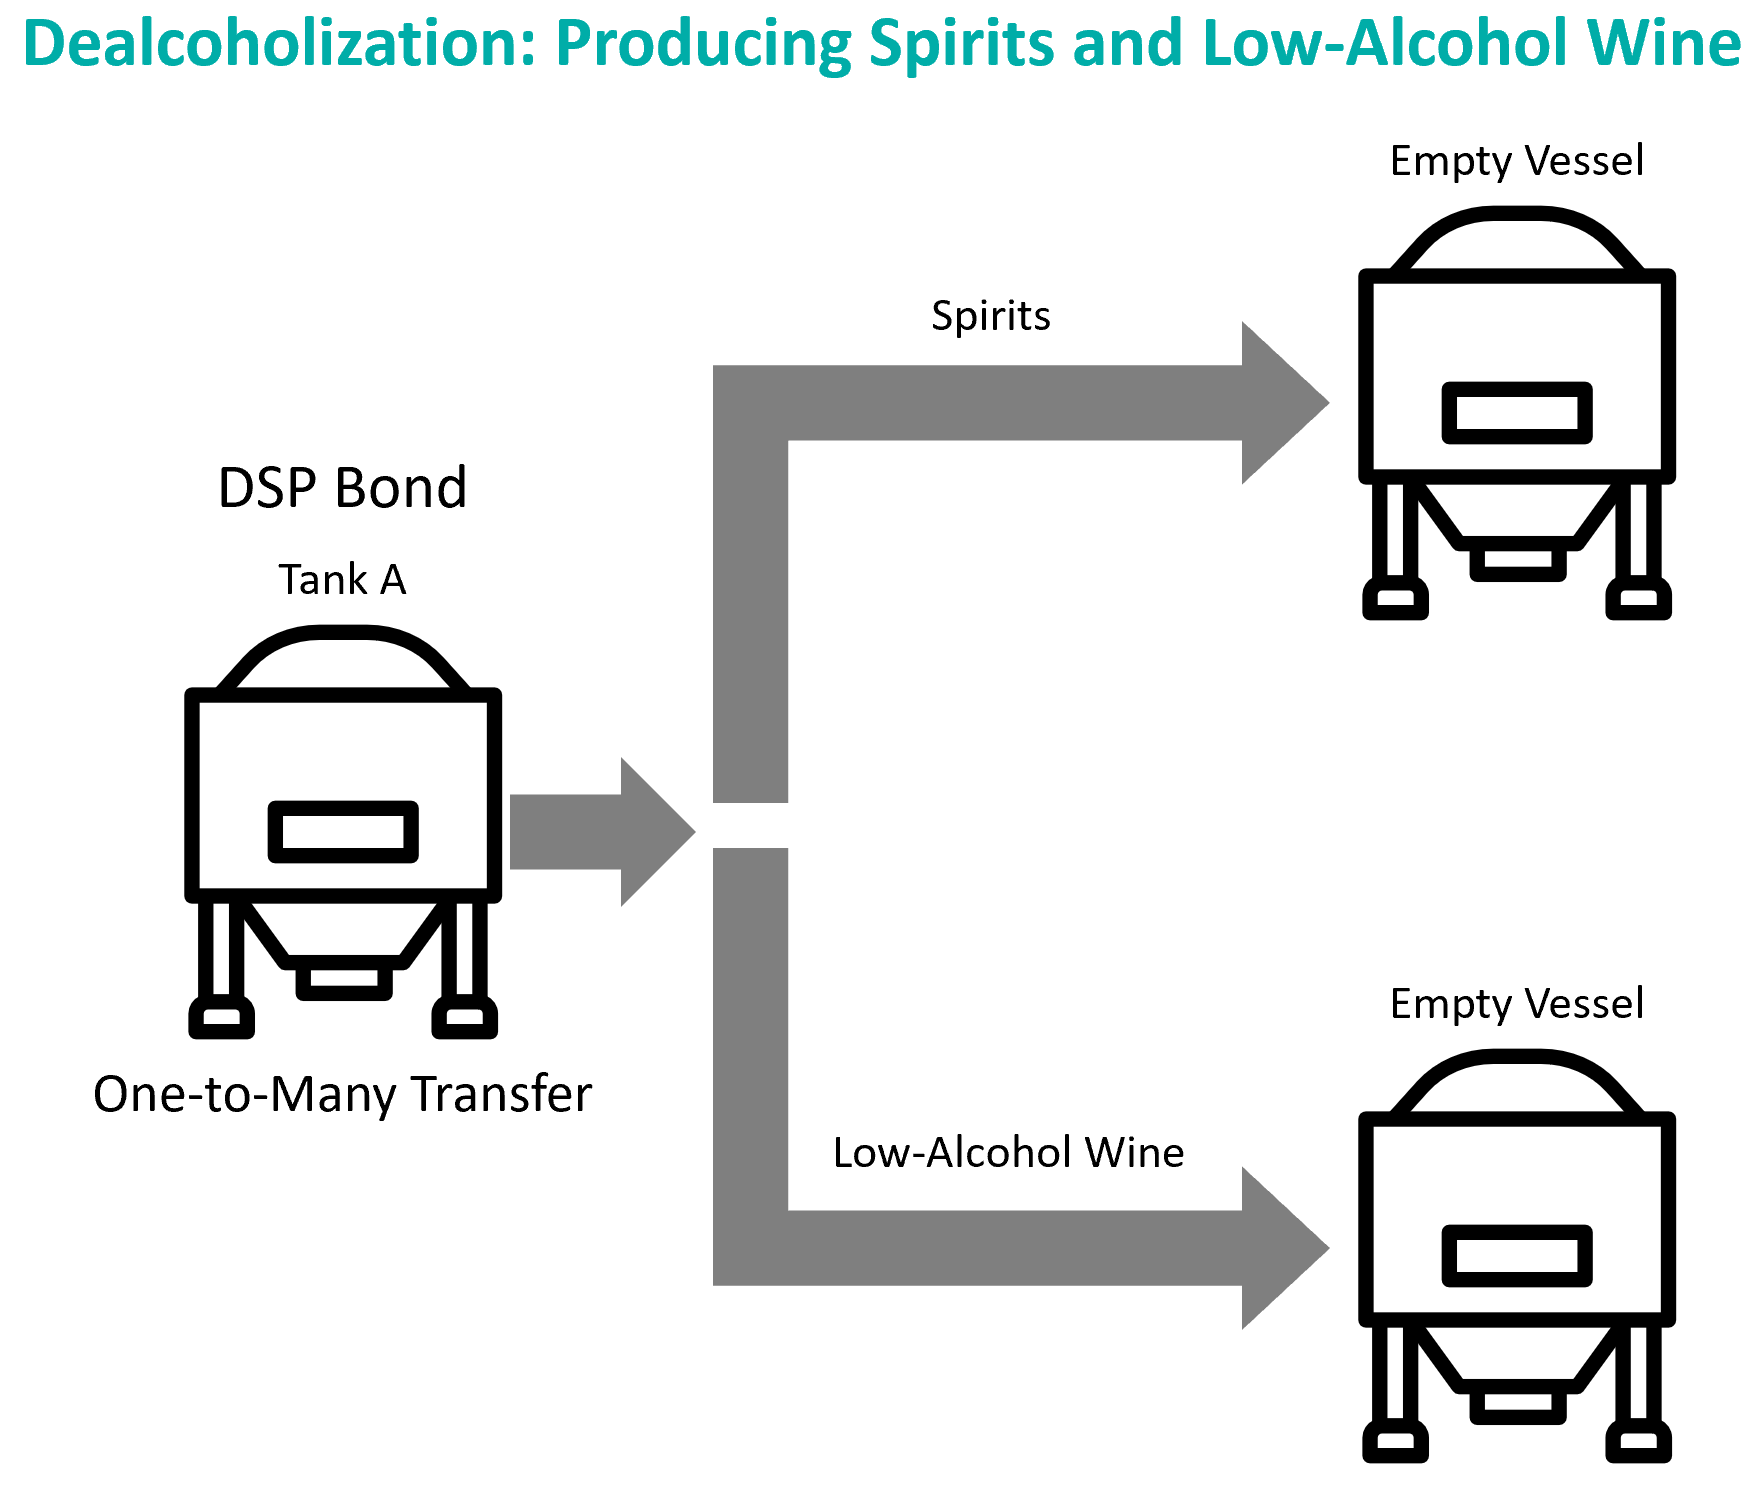 Diagram - Dealc Producing Spirits and Low-Alc Wine 20230904.png